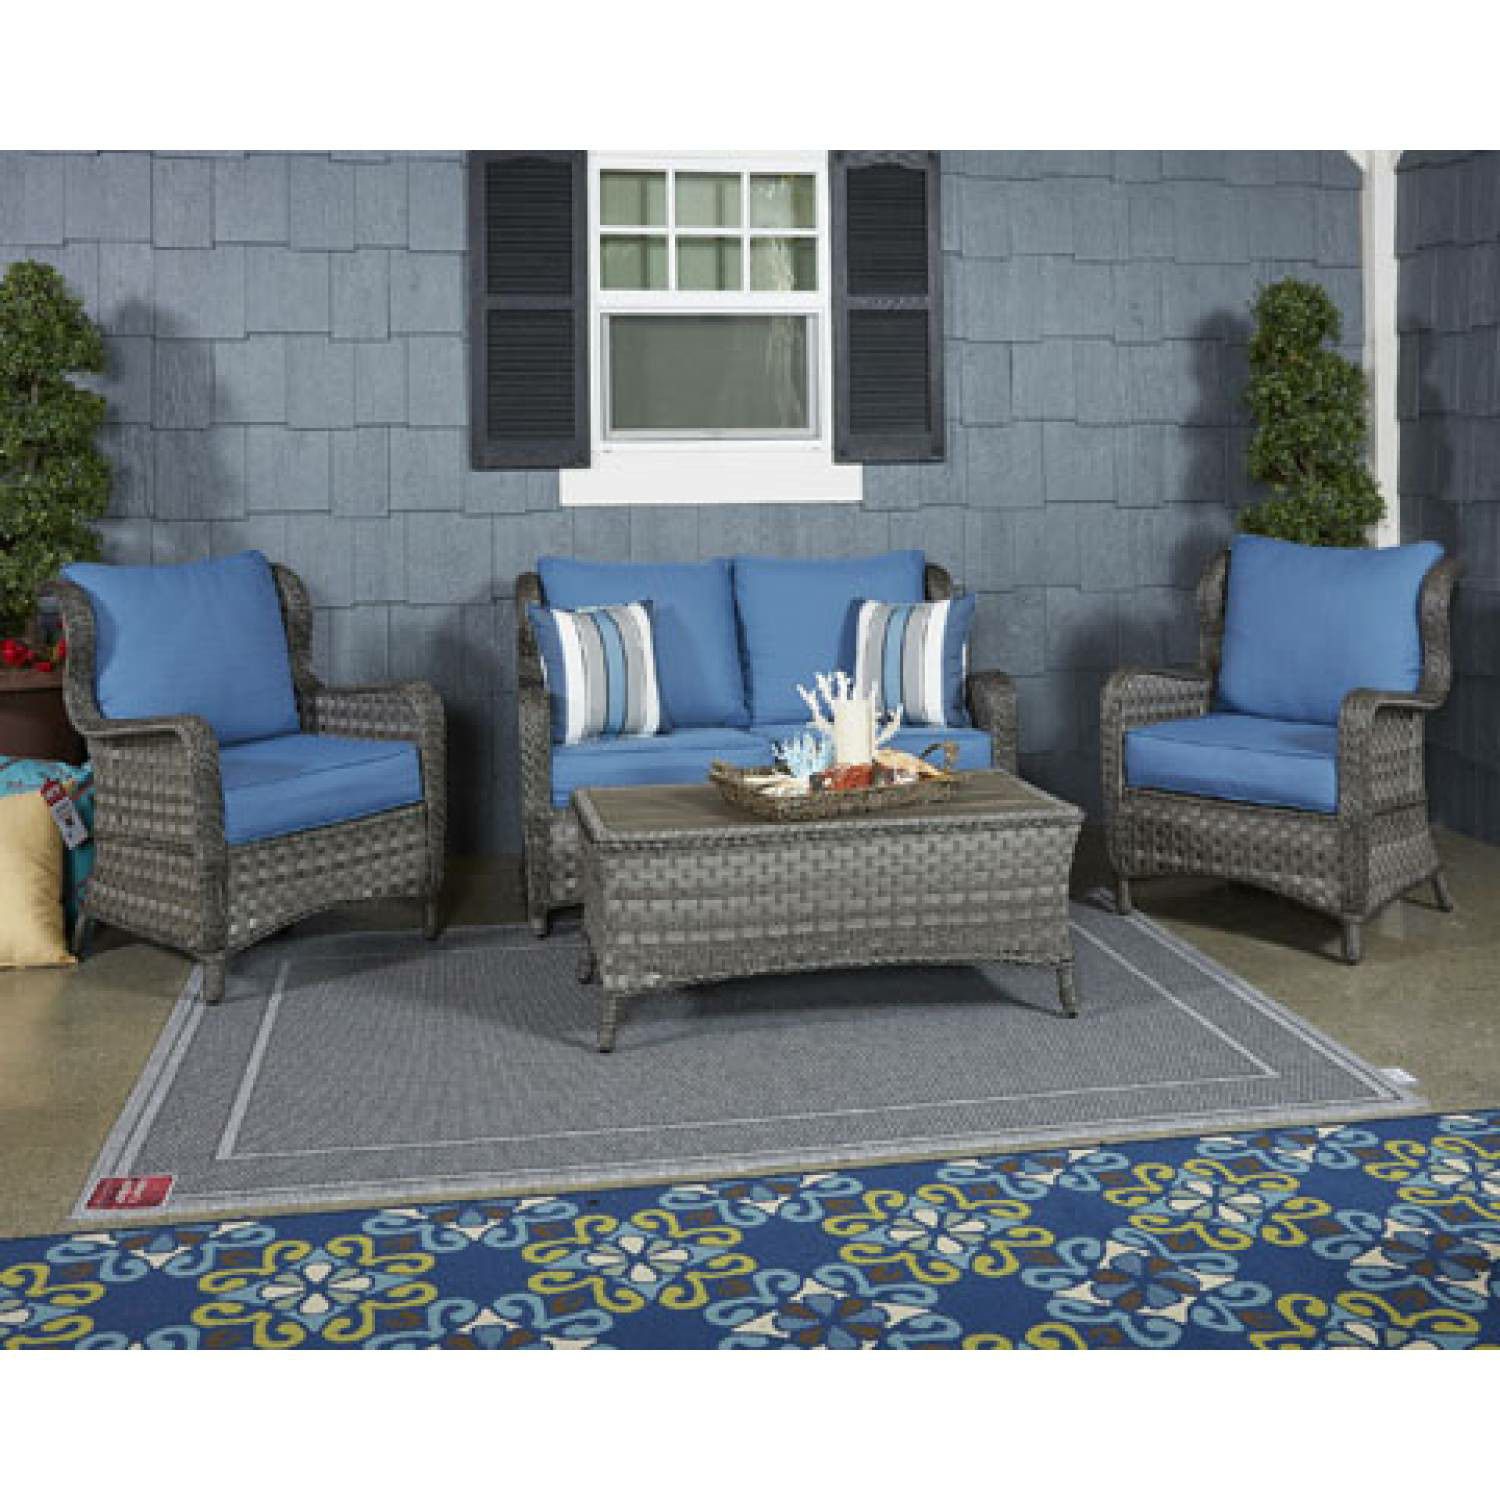 New 4pc outdoor patio furniture seating set tax included free delivery